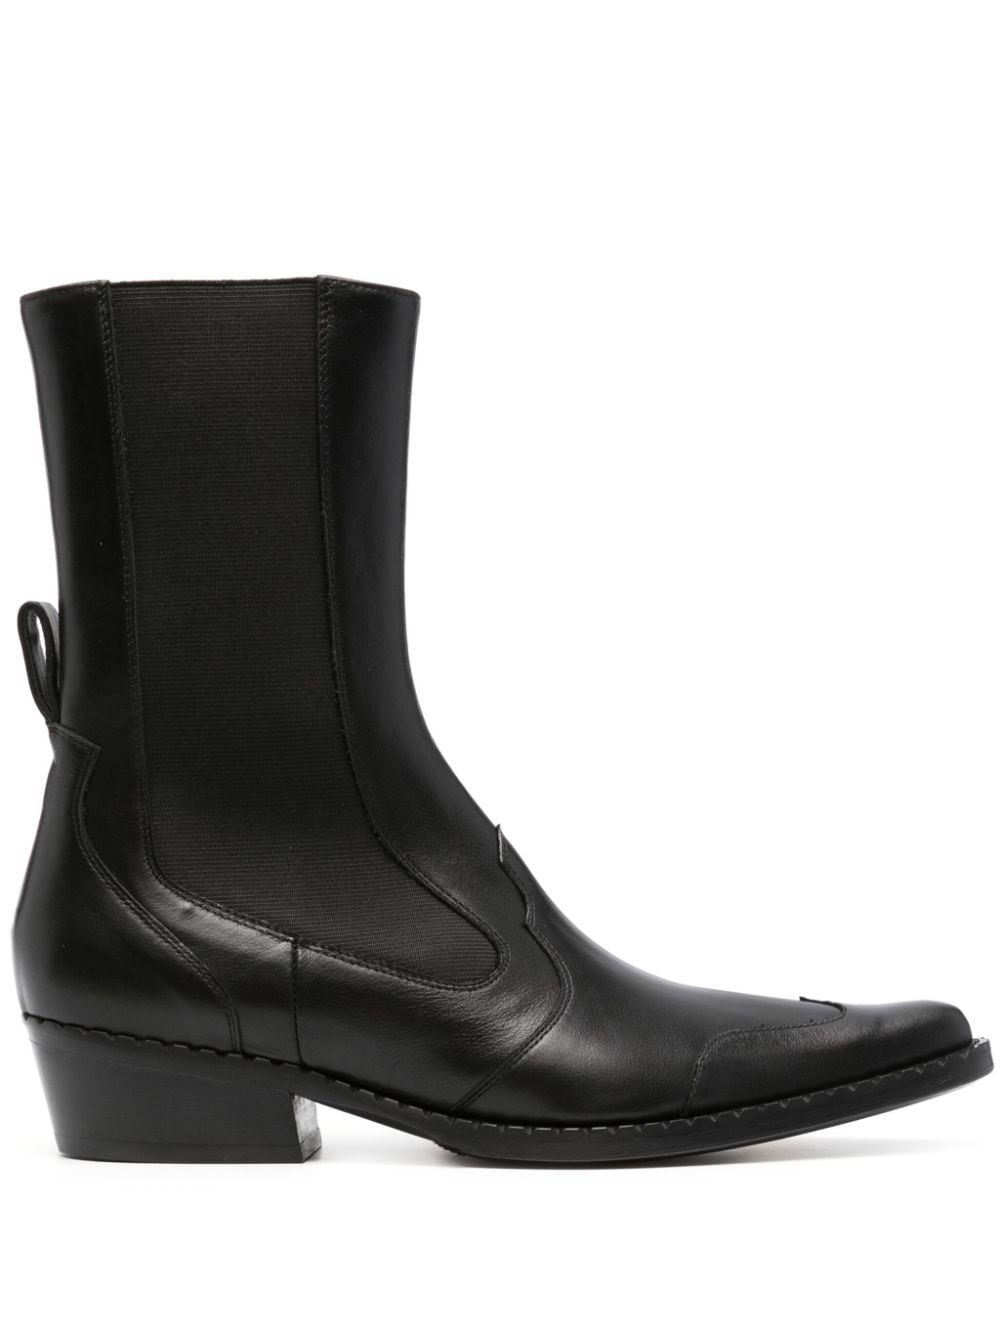 BY FAR Otis 40mm leather boots - Nero